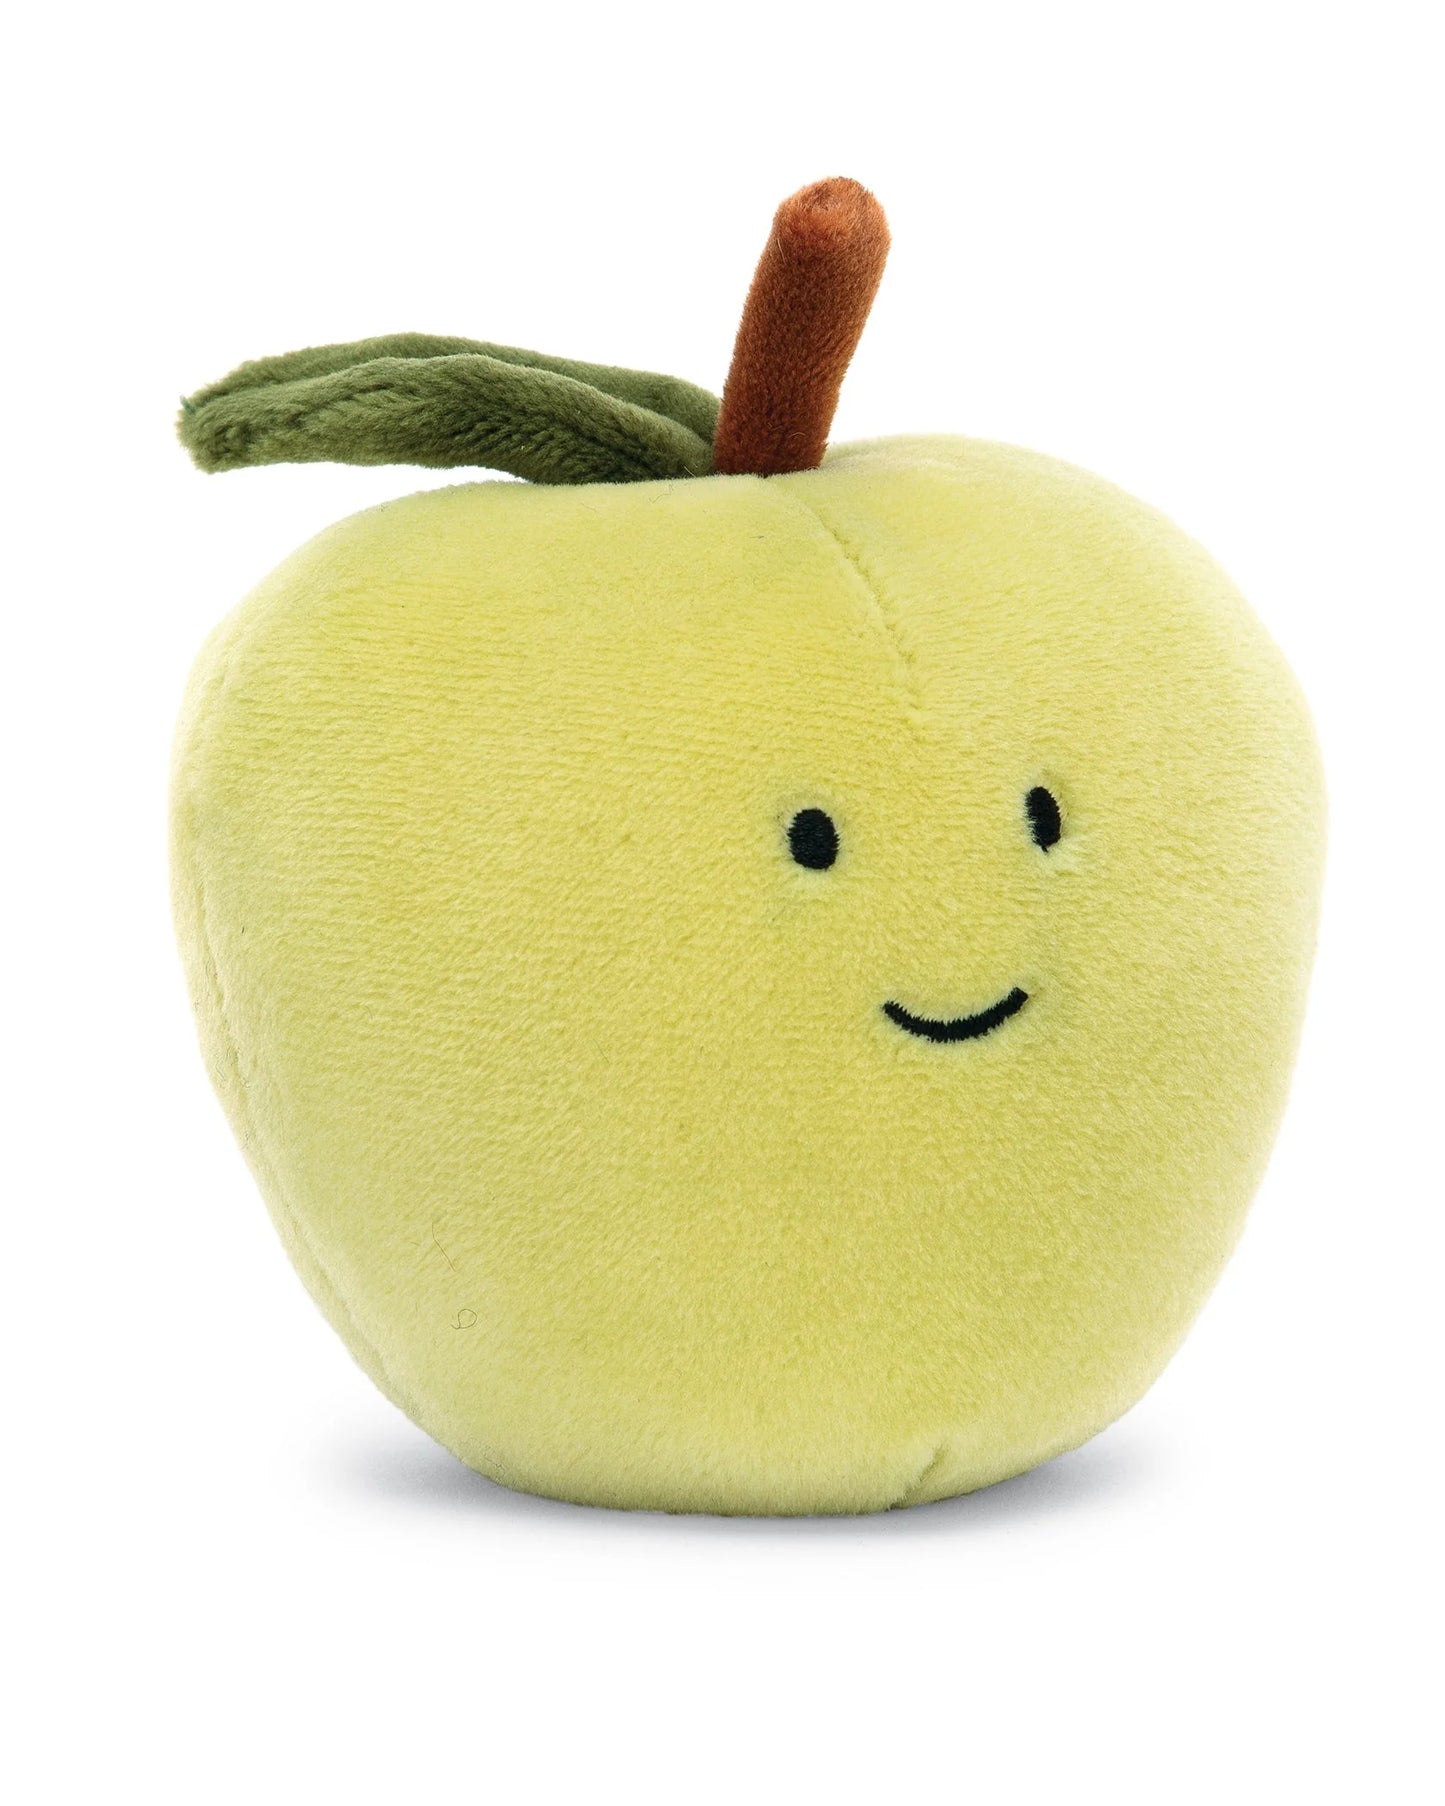 light green apple plush toy with smiling face.